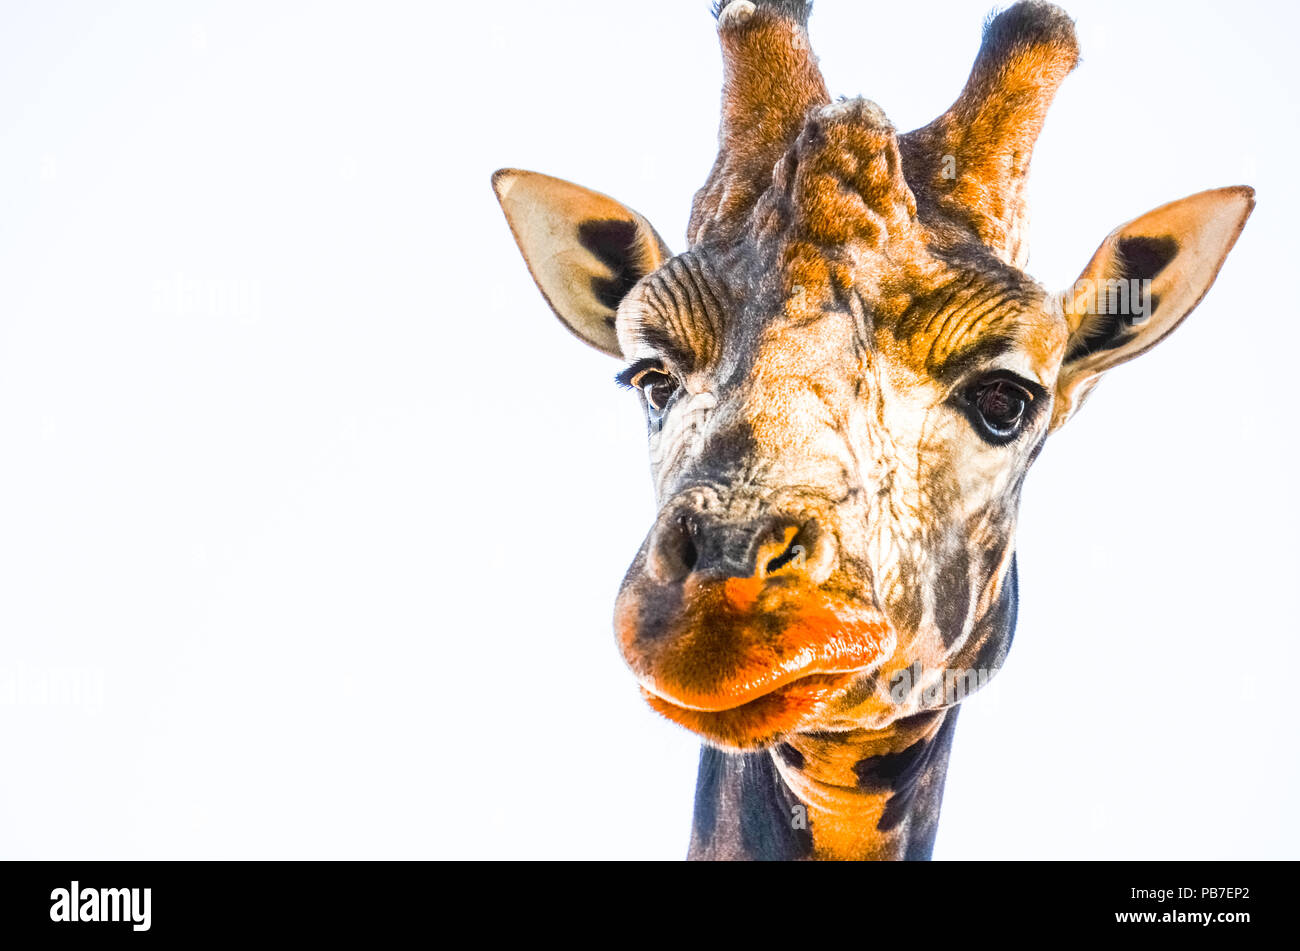 Close up animal portrait of giraffe head, looking down camera isolated on white background. Curious giraffe with big lips looking directly at camera. Stock Photo